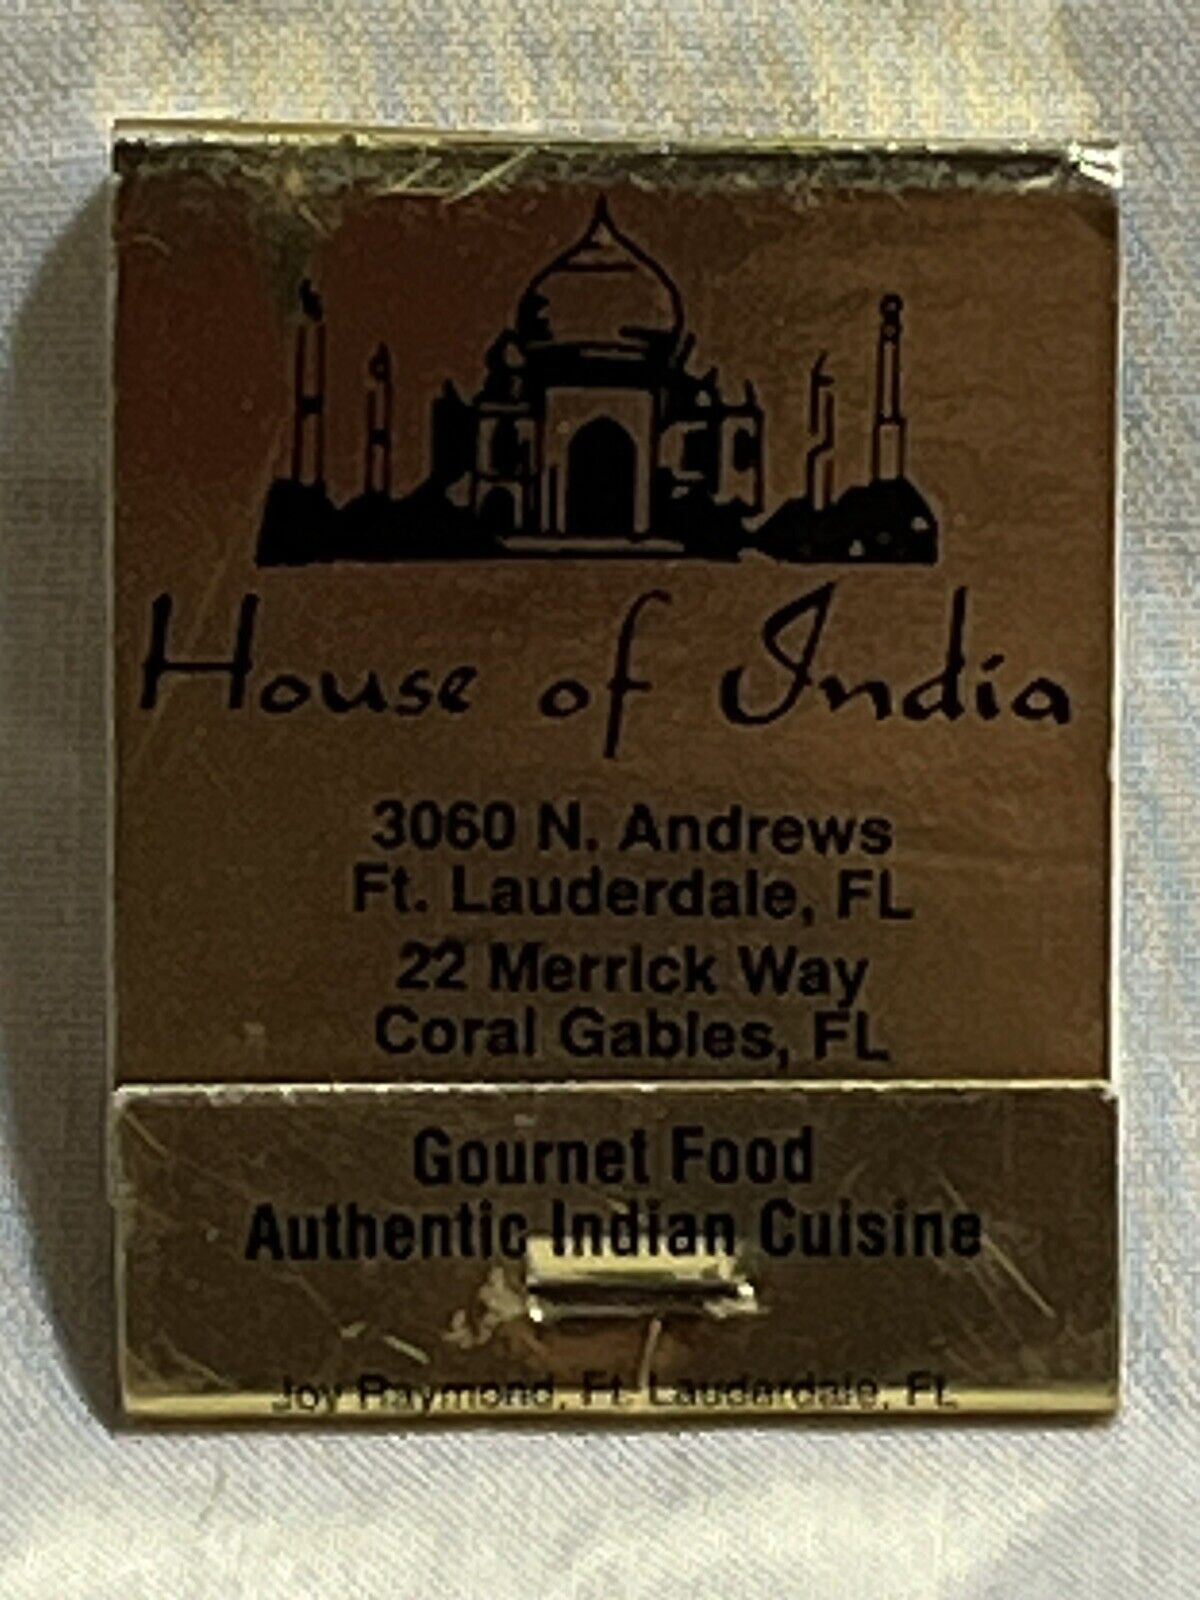 Matchbook “House Of India” Vintage Complete Set Of Matches - Very Nice Condition